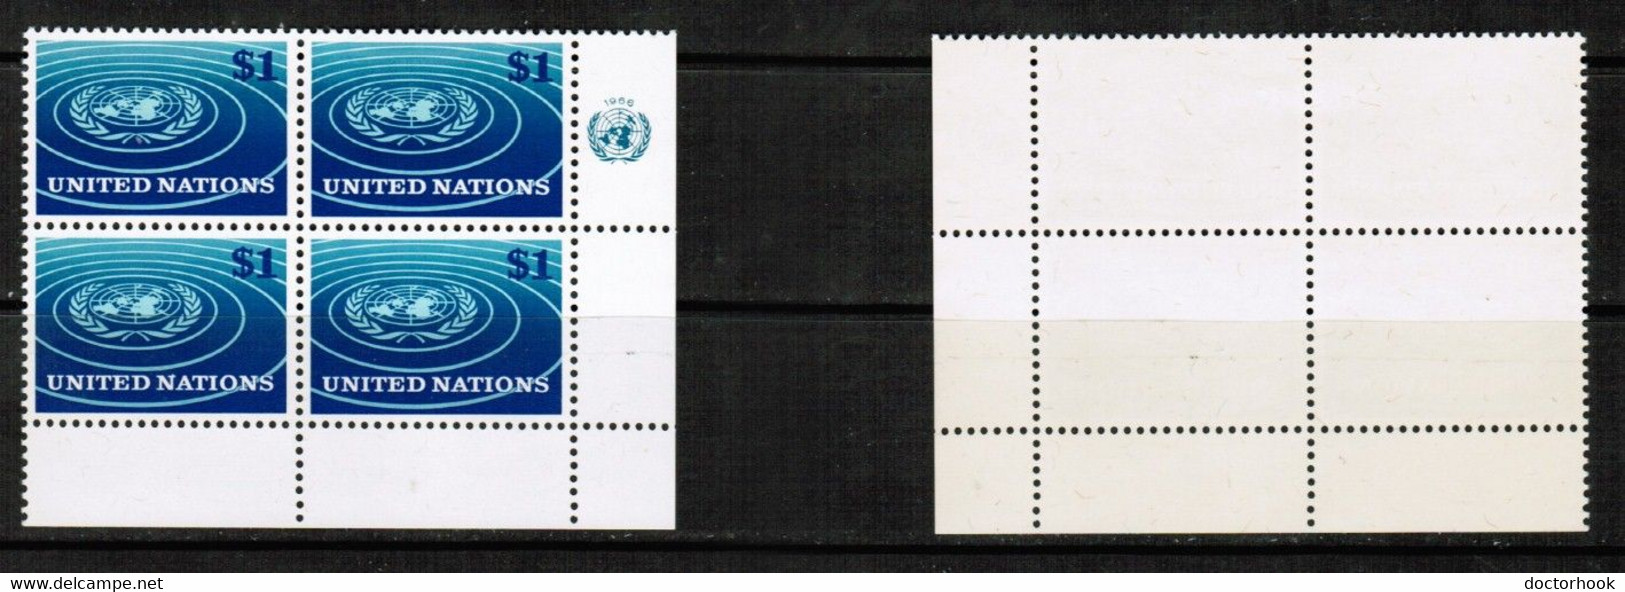 UNITED NATIONS---N.Y.   Scott # 150** MINT NH Imprint Blk Of 4 (CONDITION AS PER SCAN) (WW-1-53) - Hojas Y Bloques